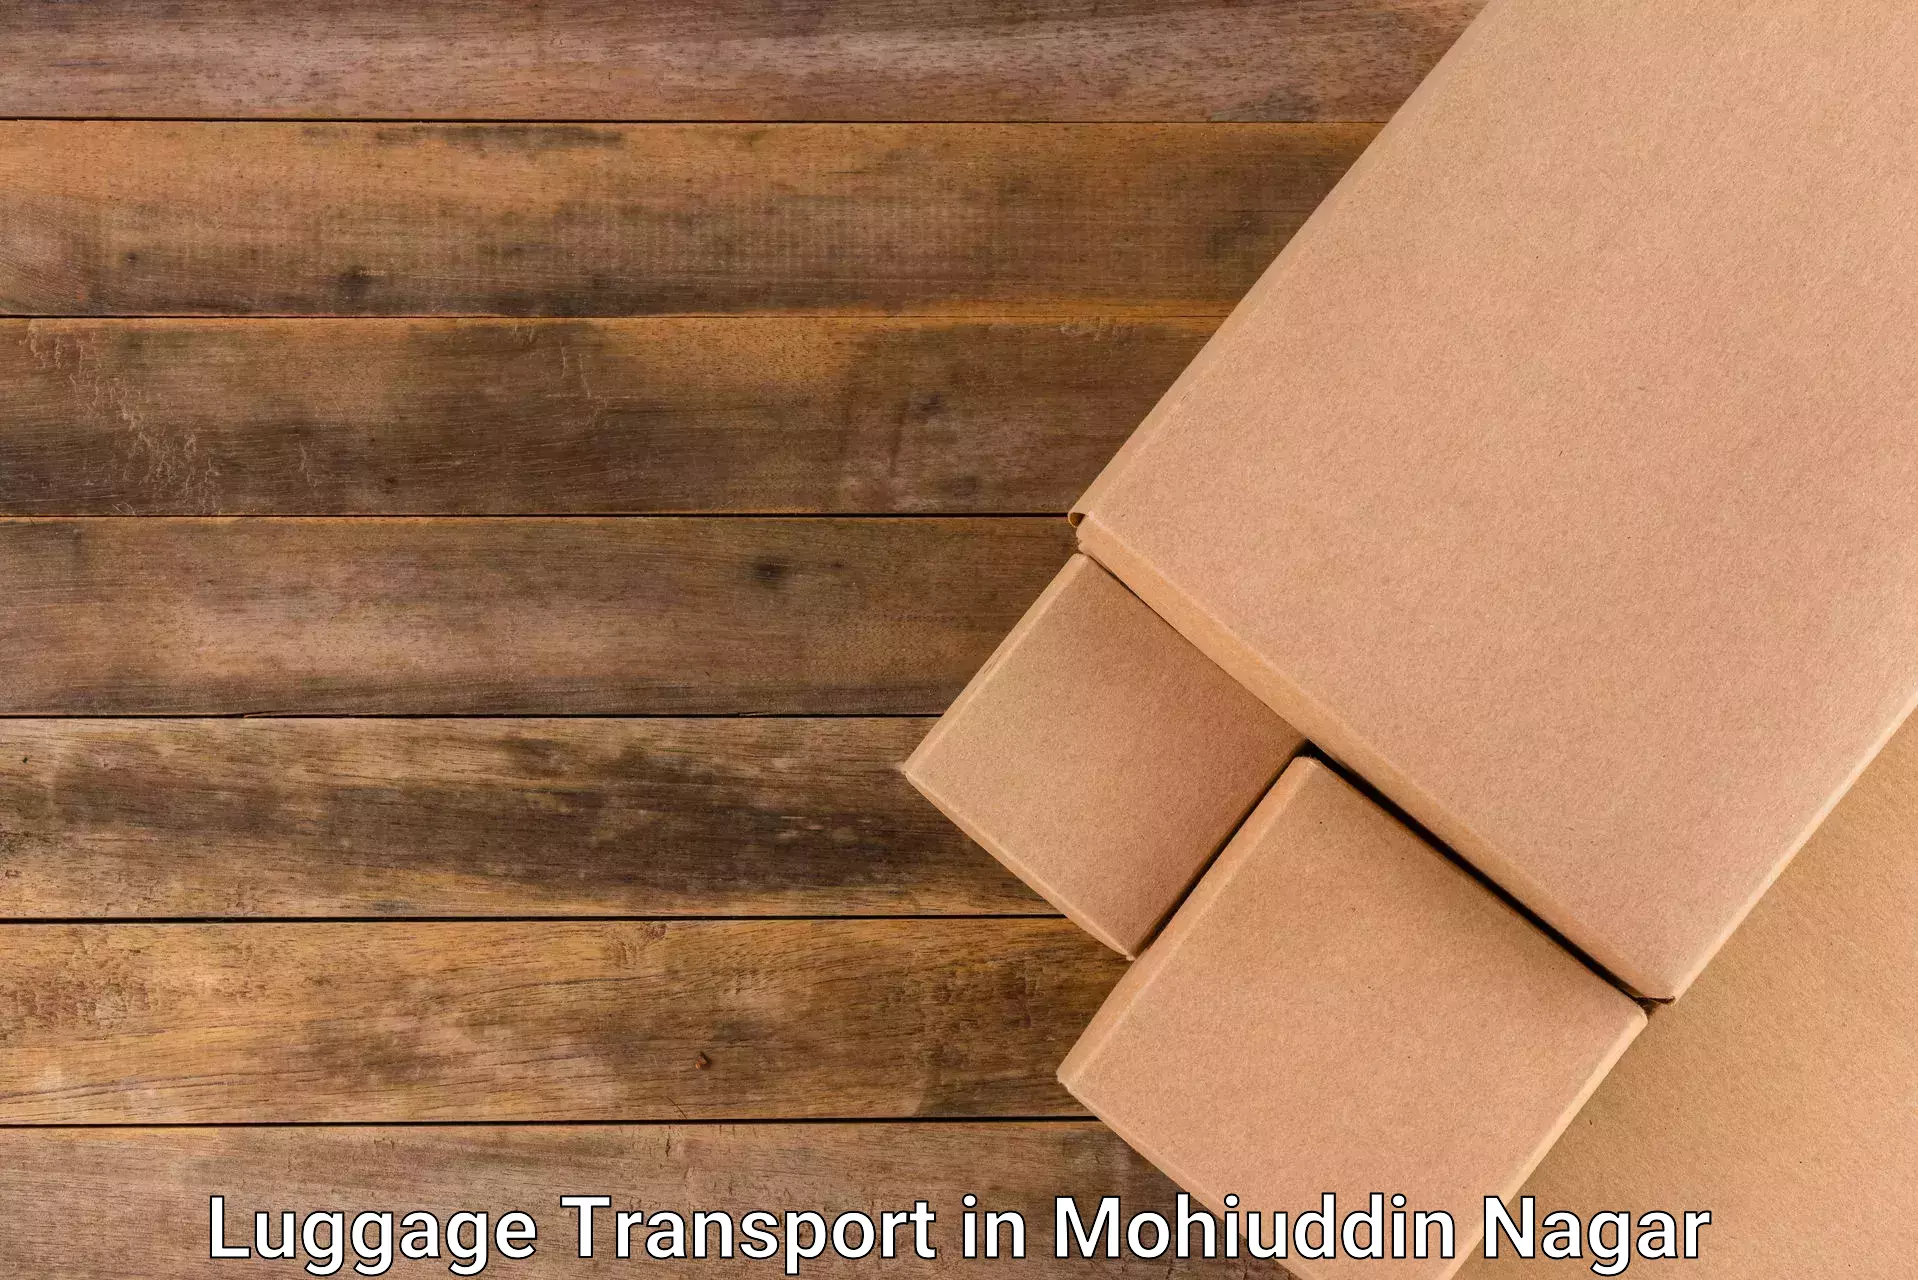 Luggage transport consulting in Mohiuddin Nagar